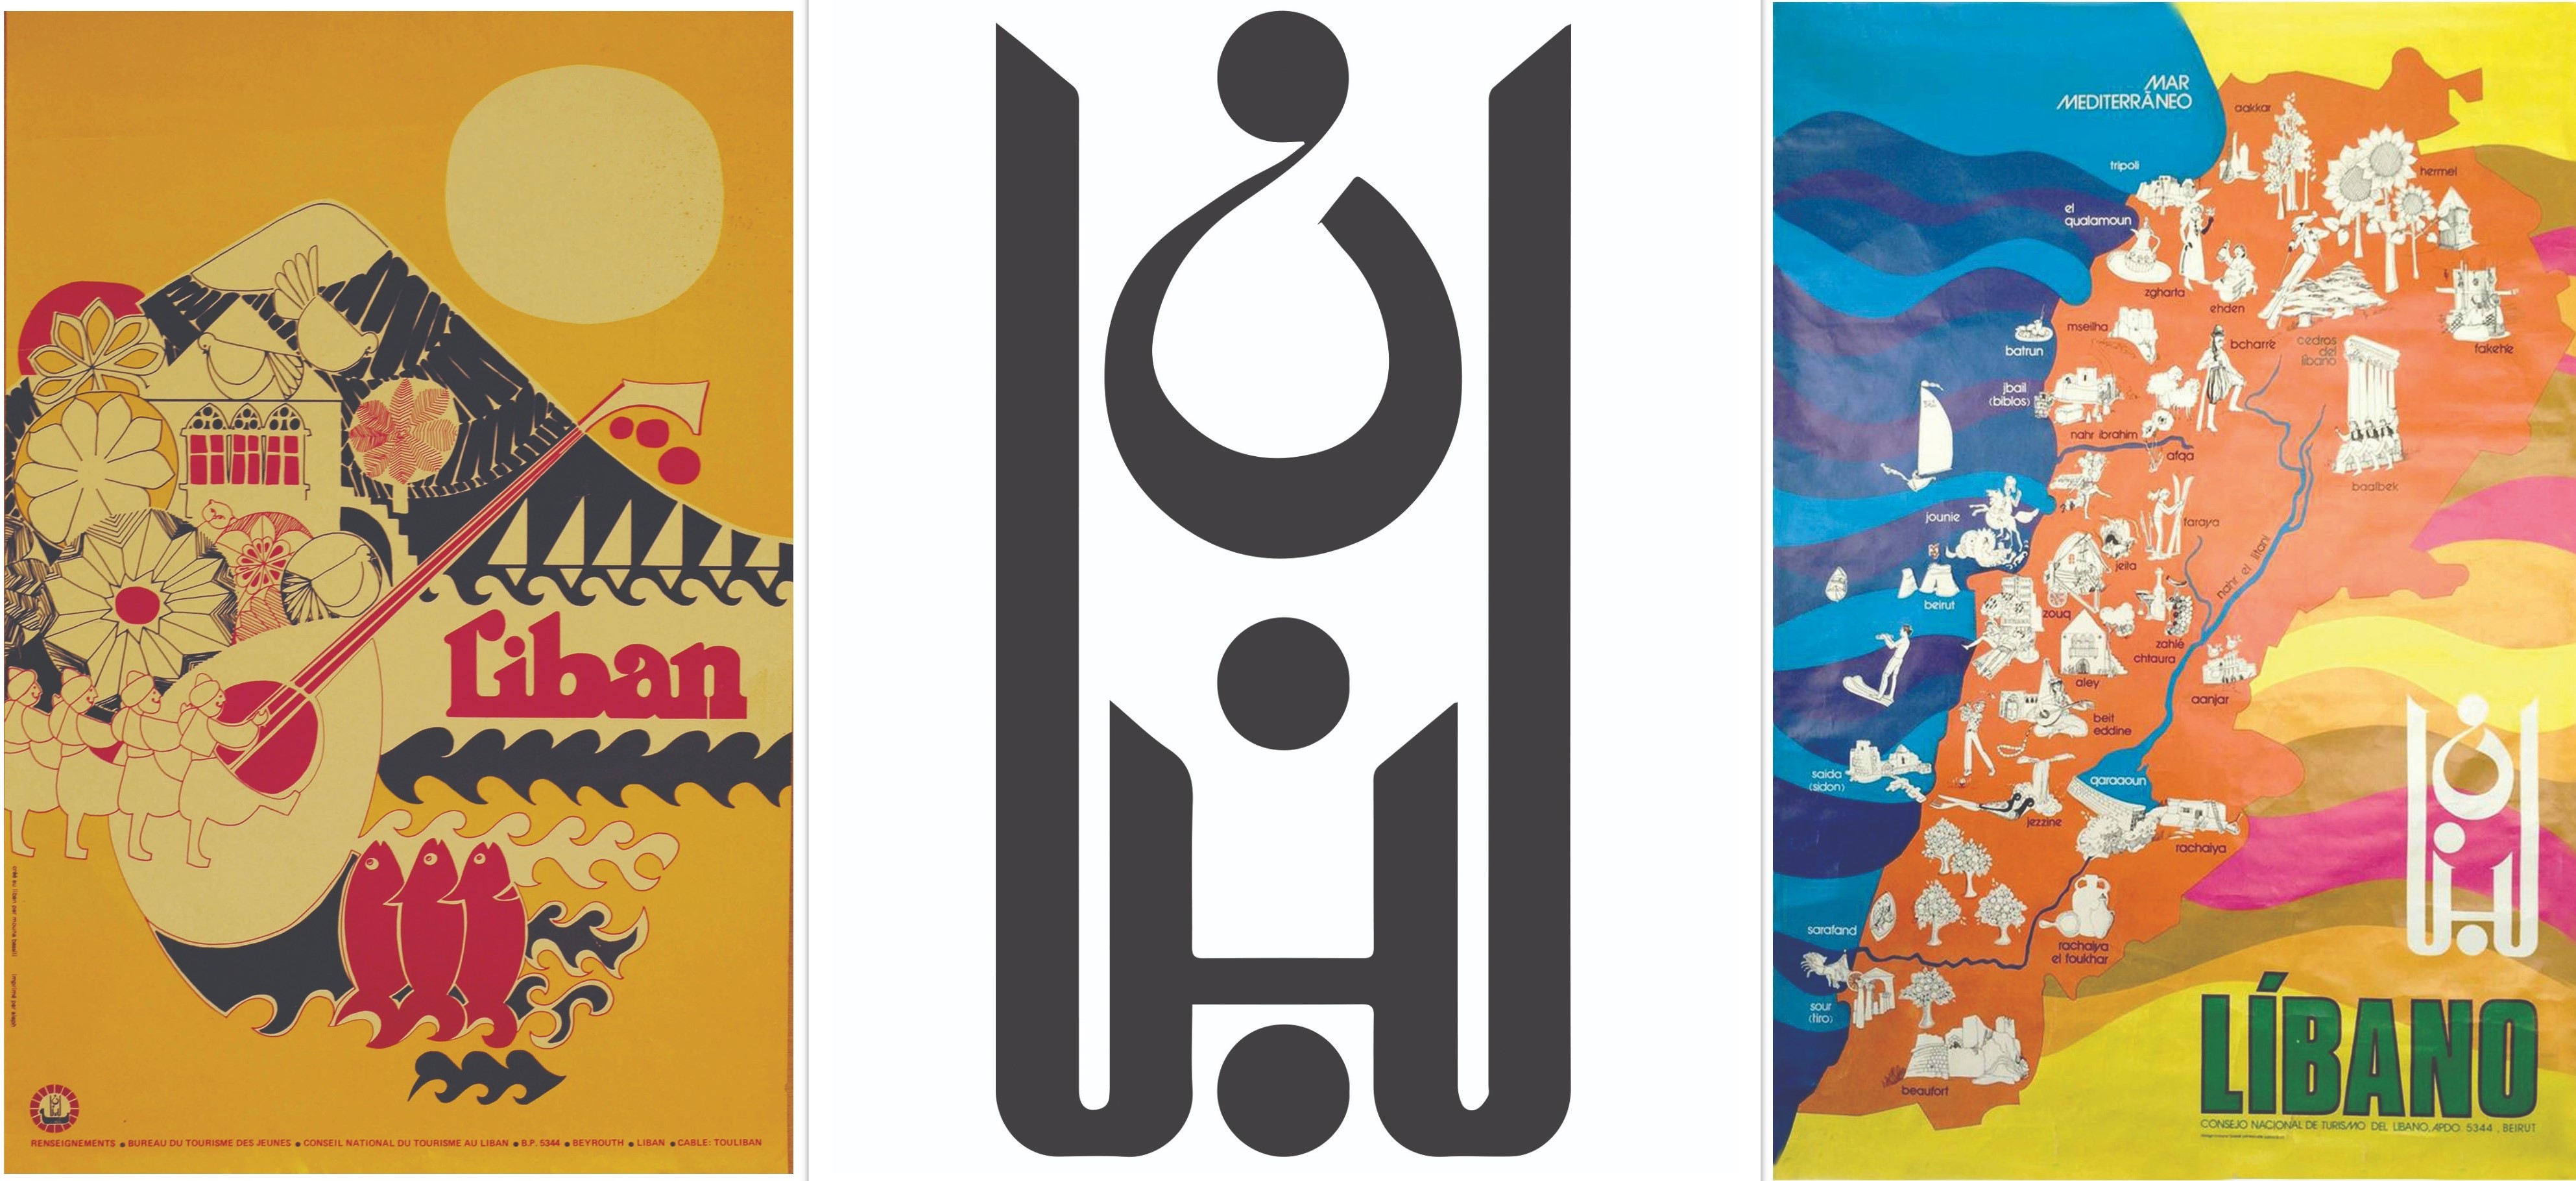 Left to right: French poster for the Lebanese National Council of Tourism; “Lebanon” logo; Italian poster for the Lebanese National Council of Tourism. All by Mouna Bassili Sehanoui, 1970s. Shehab describes her work: “It was through her illustrations and visualizations that Lebanon was represented to the world.”